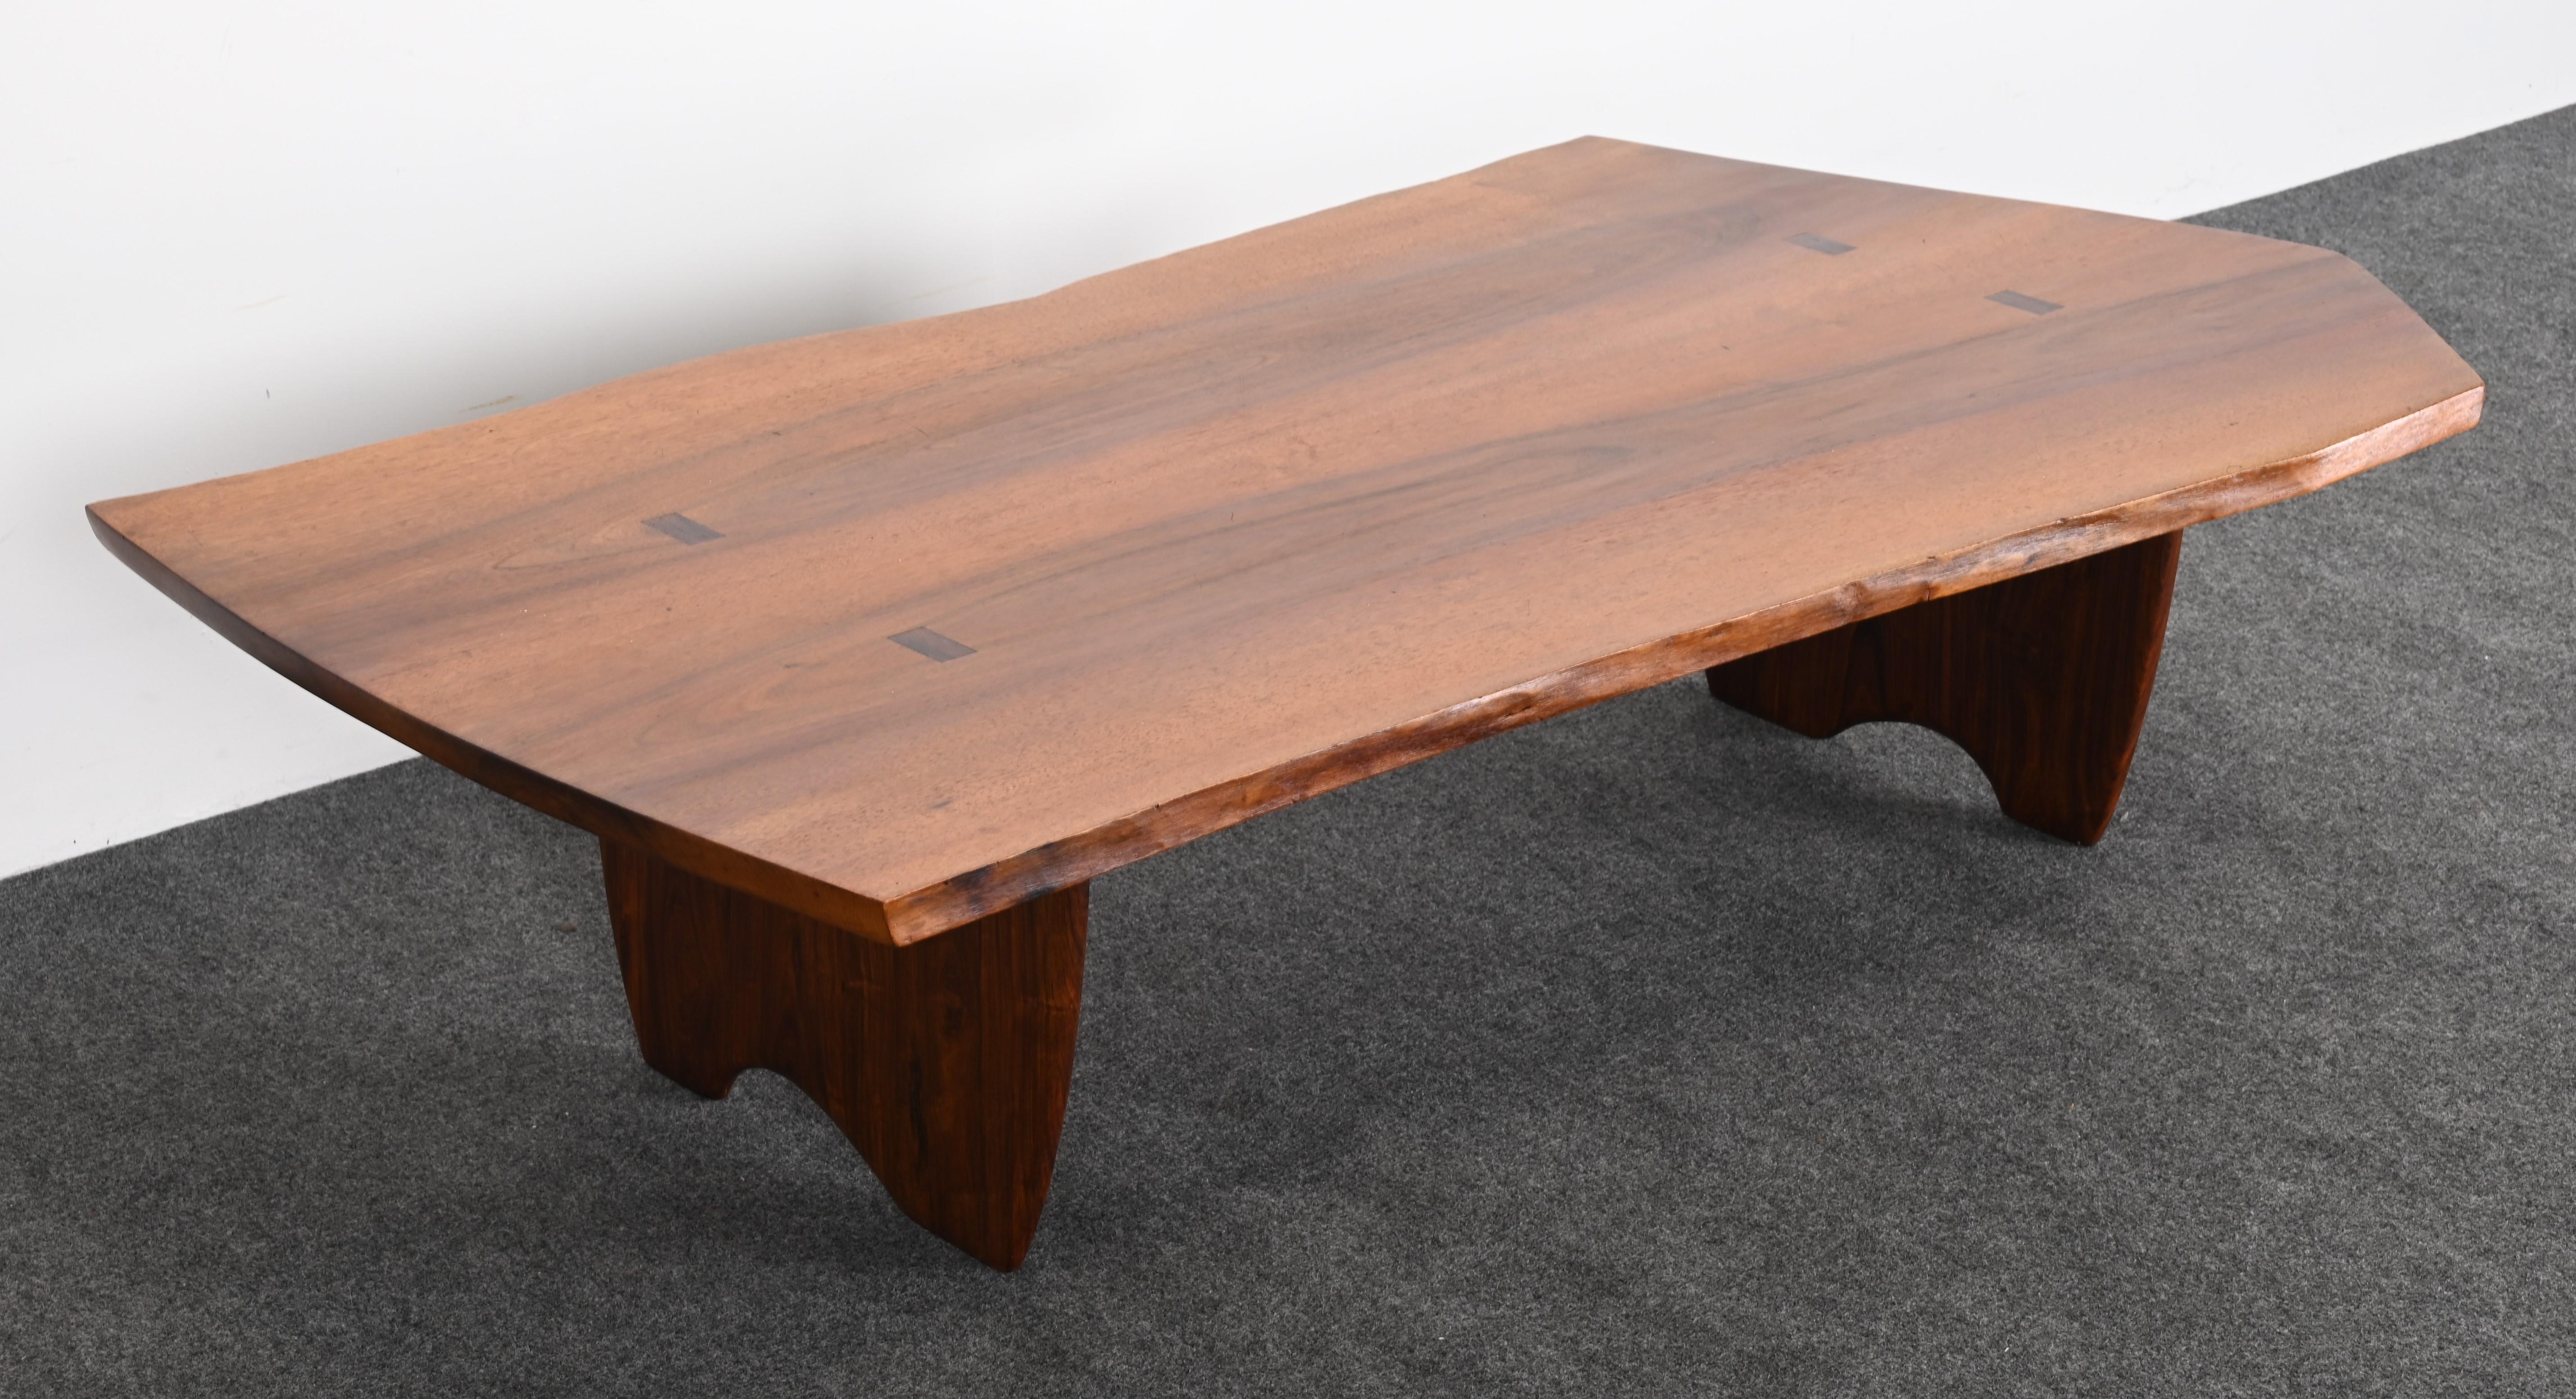 Live Edge Solid Walnut and Rosewood Coffee Table by Richard Rothbard, 1968 For Sale 4